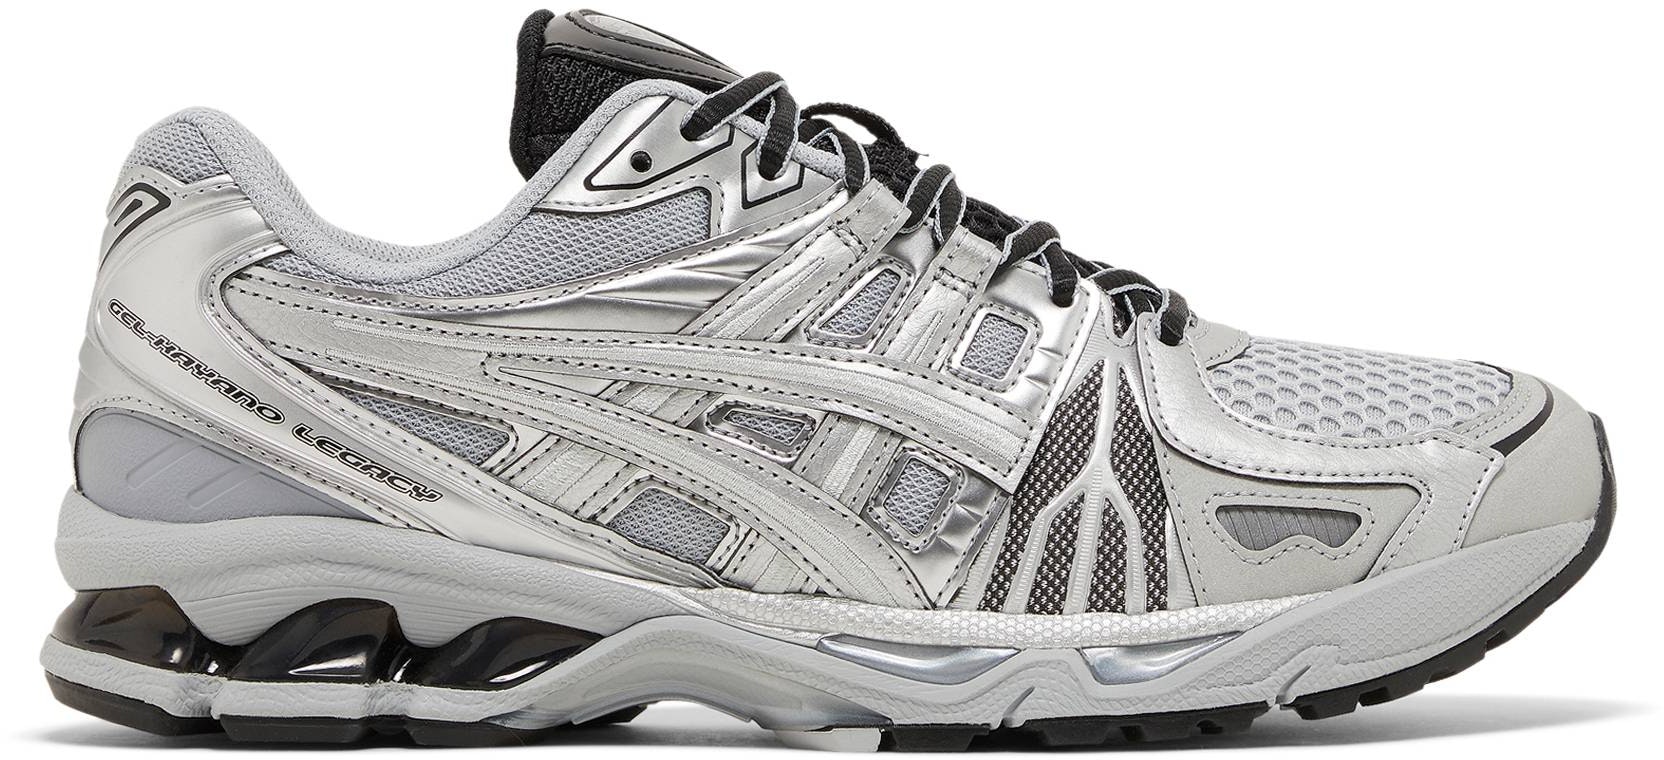 ASICS Gel Kayano Legacy 'Pure Silver' 1203A325‑020 - 1203A325-020 ...